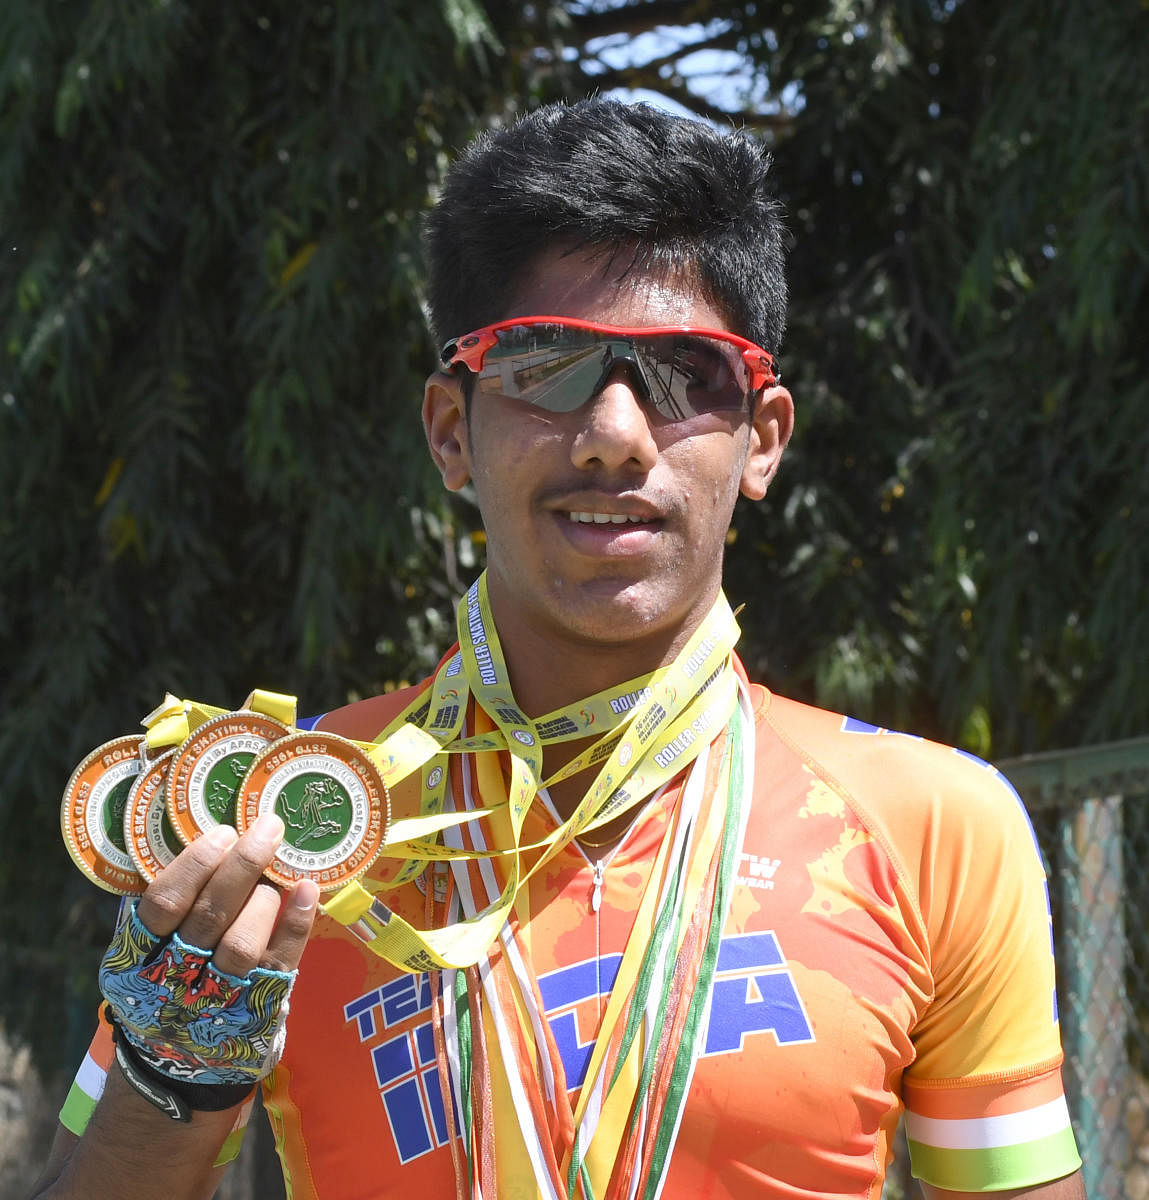 GRITTY Tejas P Ramesh overcame a fracture on the right hand to win three gold medals at the National Championships last December. DH photo/ Srikanta Sharma R